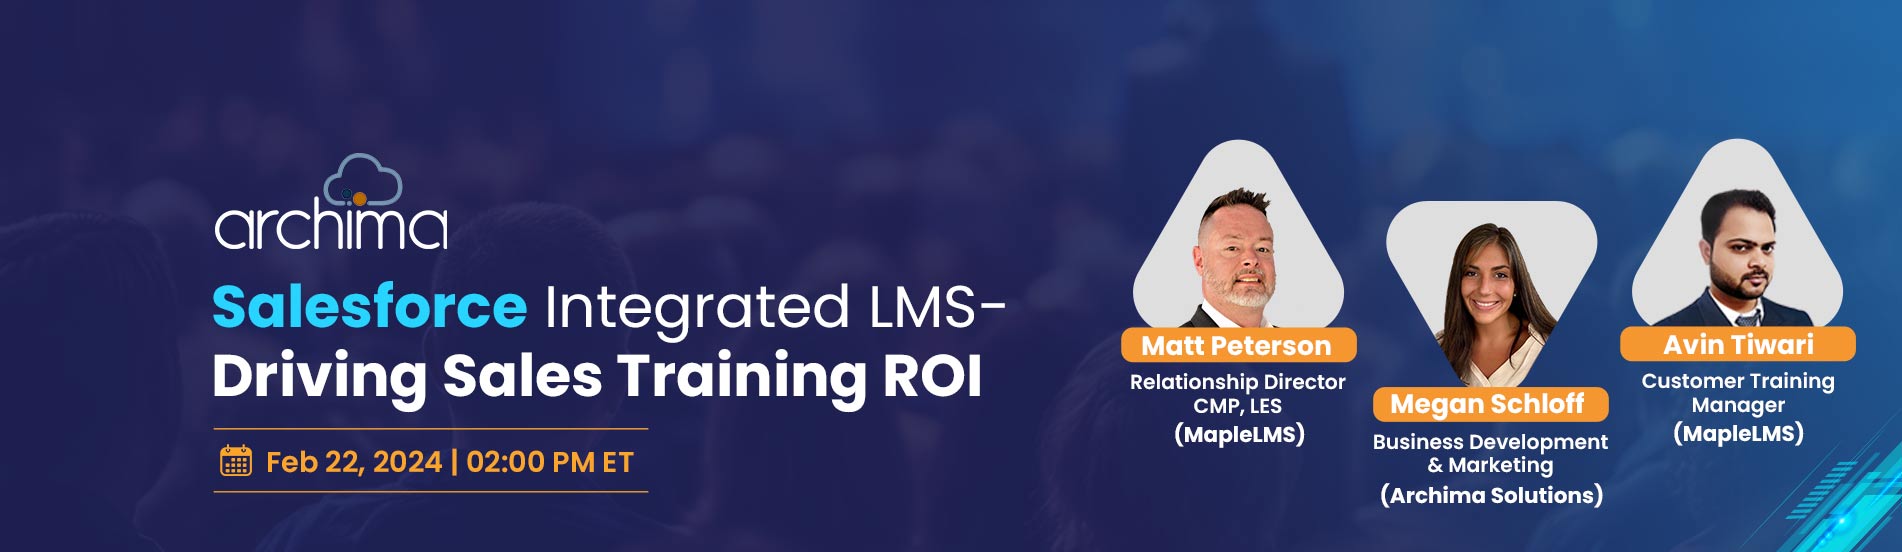 Salesforce Integrated LMS - Driving Sales Training ROI